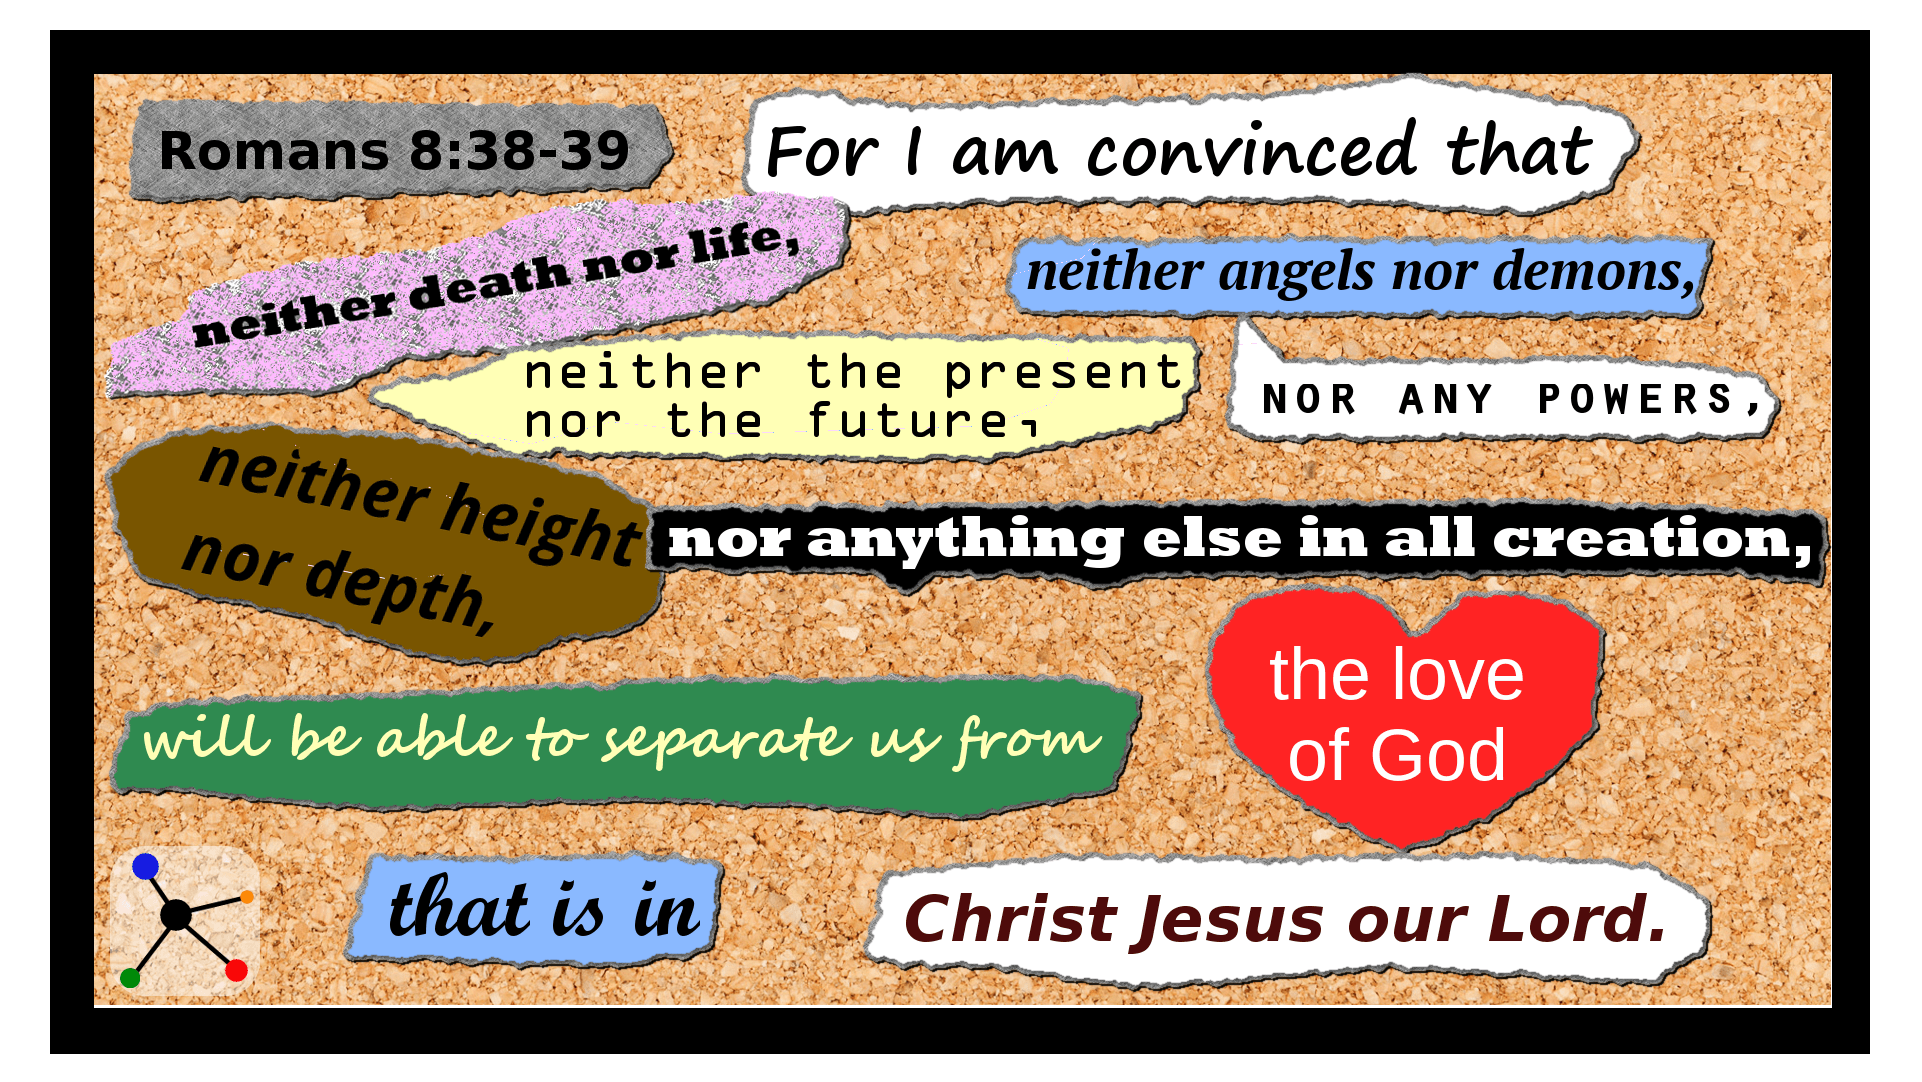 Romans 8:38-39  For I am convinced that neither death nor life, neither angels nor demons, neither the present nor the future, nor any powers,  (39)  neither height nor depth, nor anything else in all creation, will be able to separate us from the love of God that is in Christ Jesus our Lord.